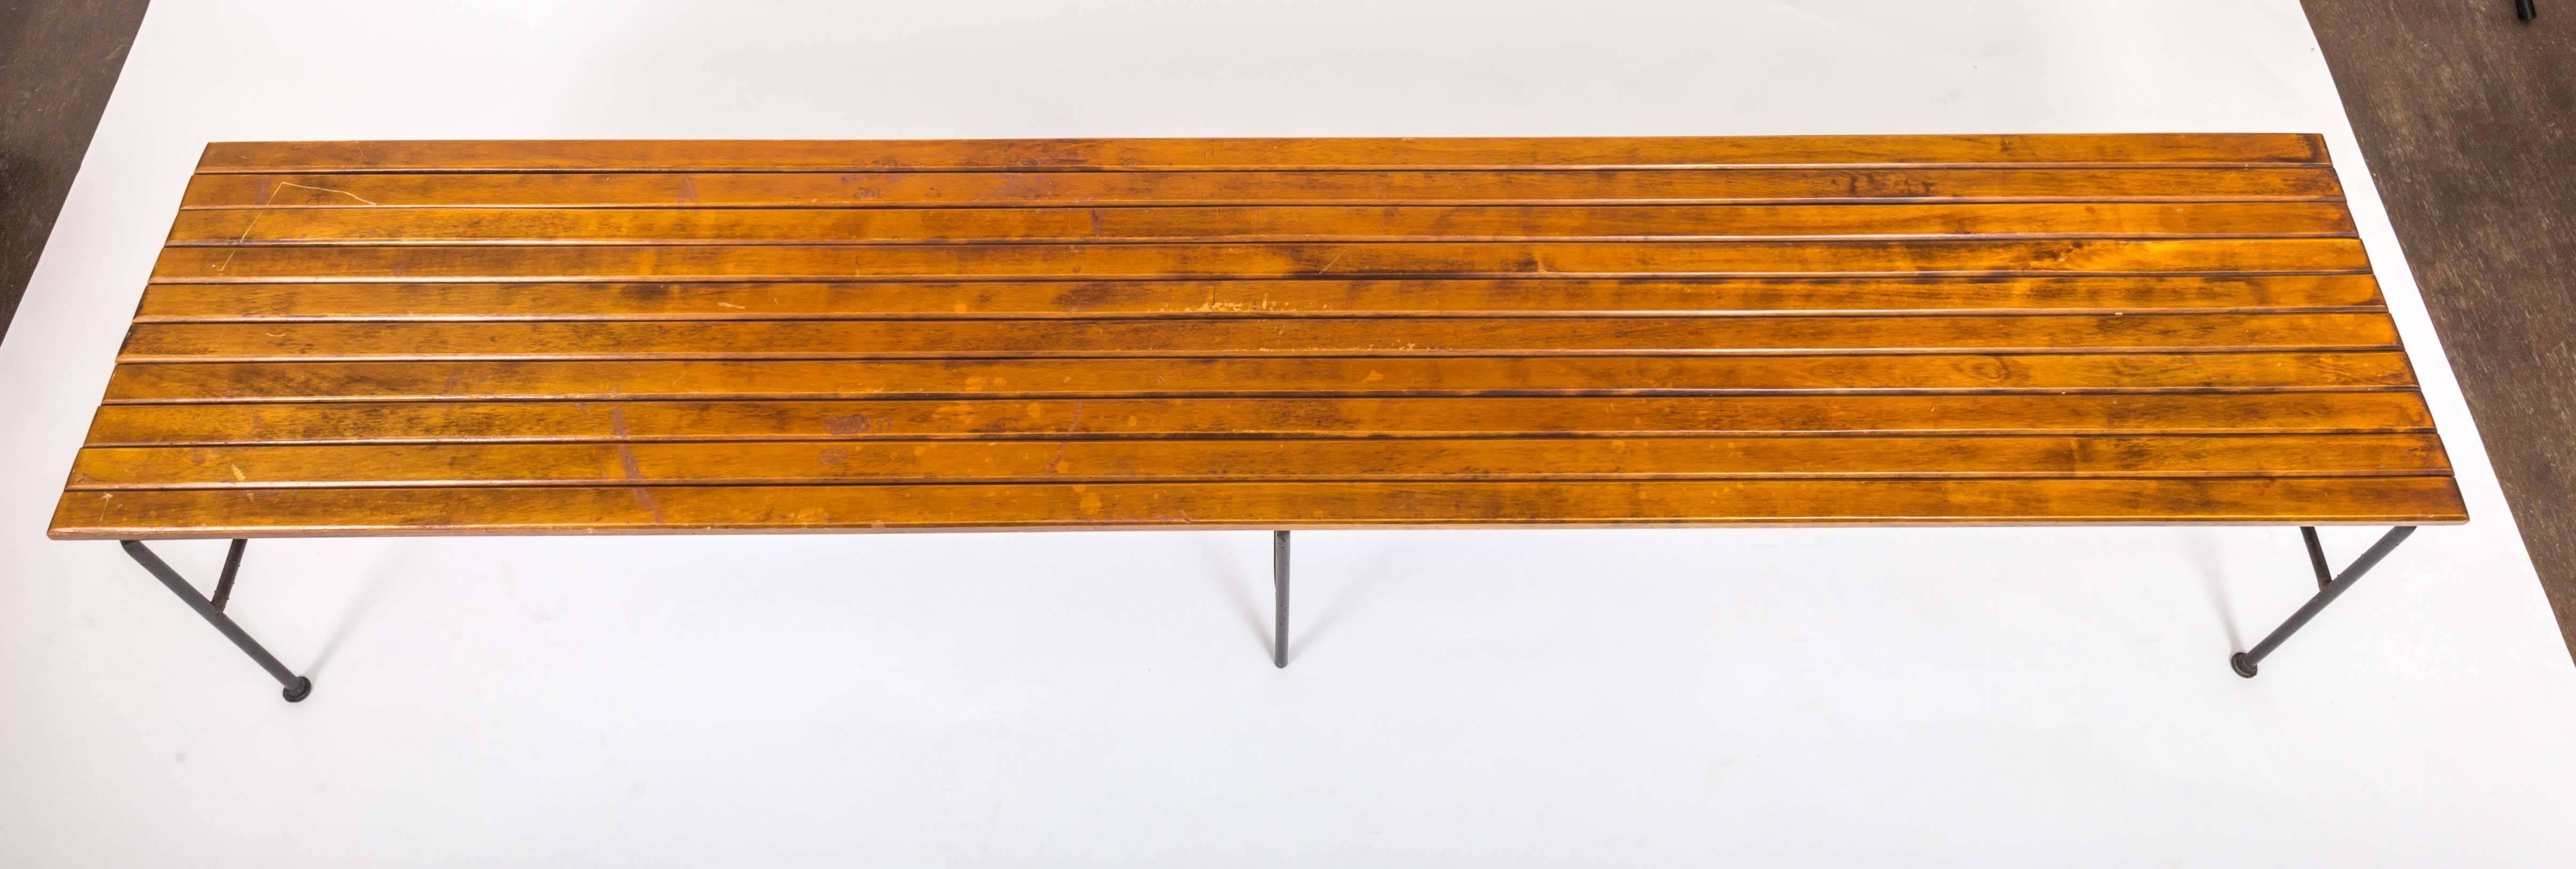 Wooden Slatted Bench by Arthur Umanoff 1